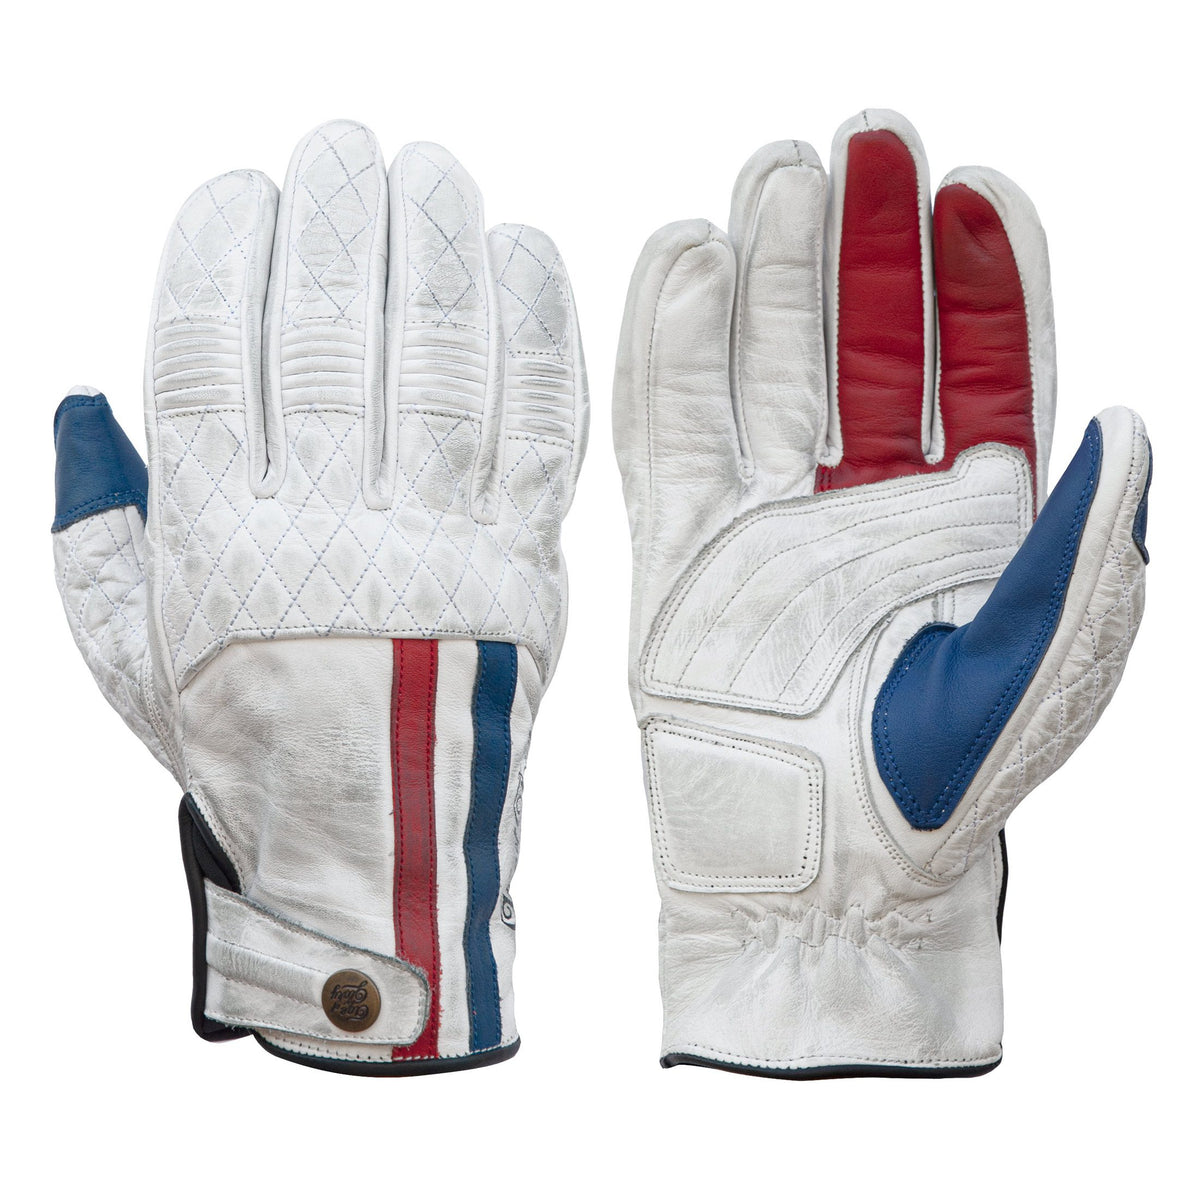 Age of Glory Miles Glove White/Blue/Red